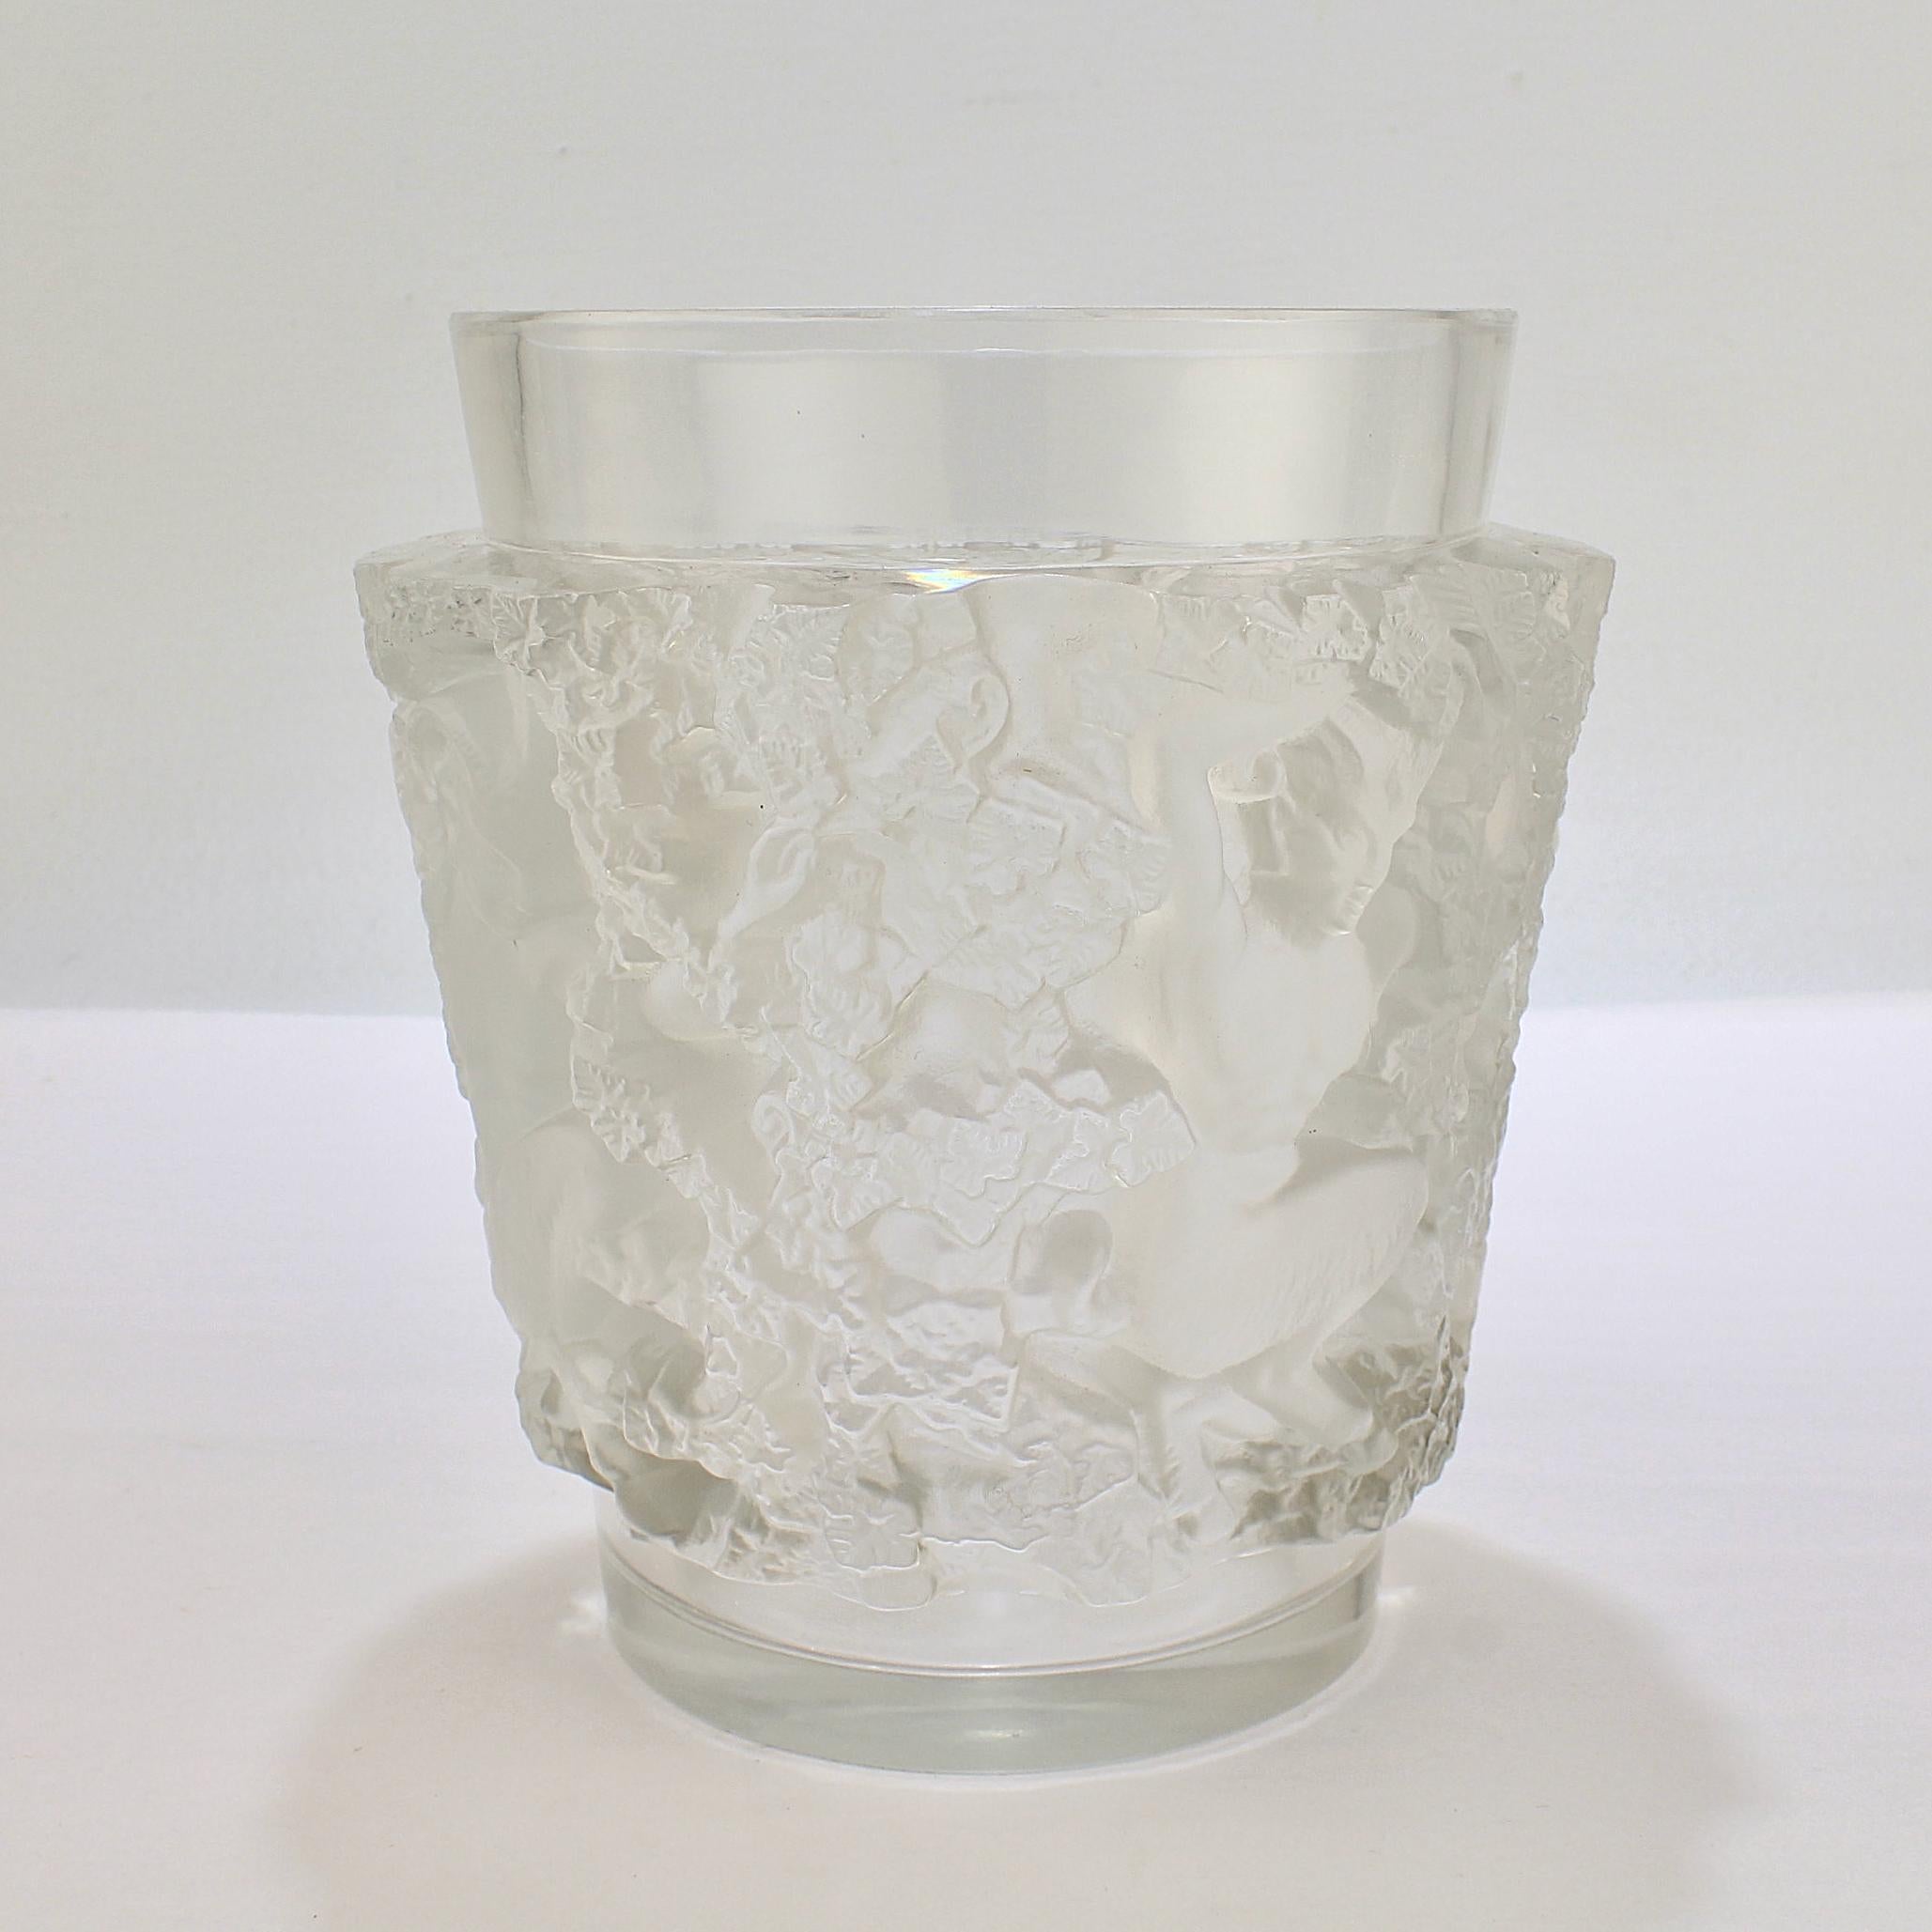 20th Century Old or Antique Lalique Frosted French Art Glass Bacchus Vase